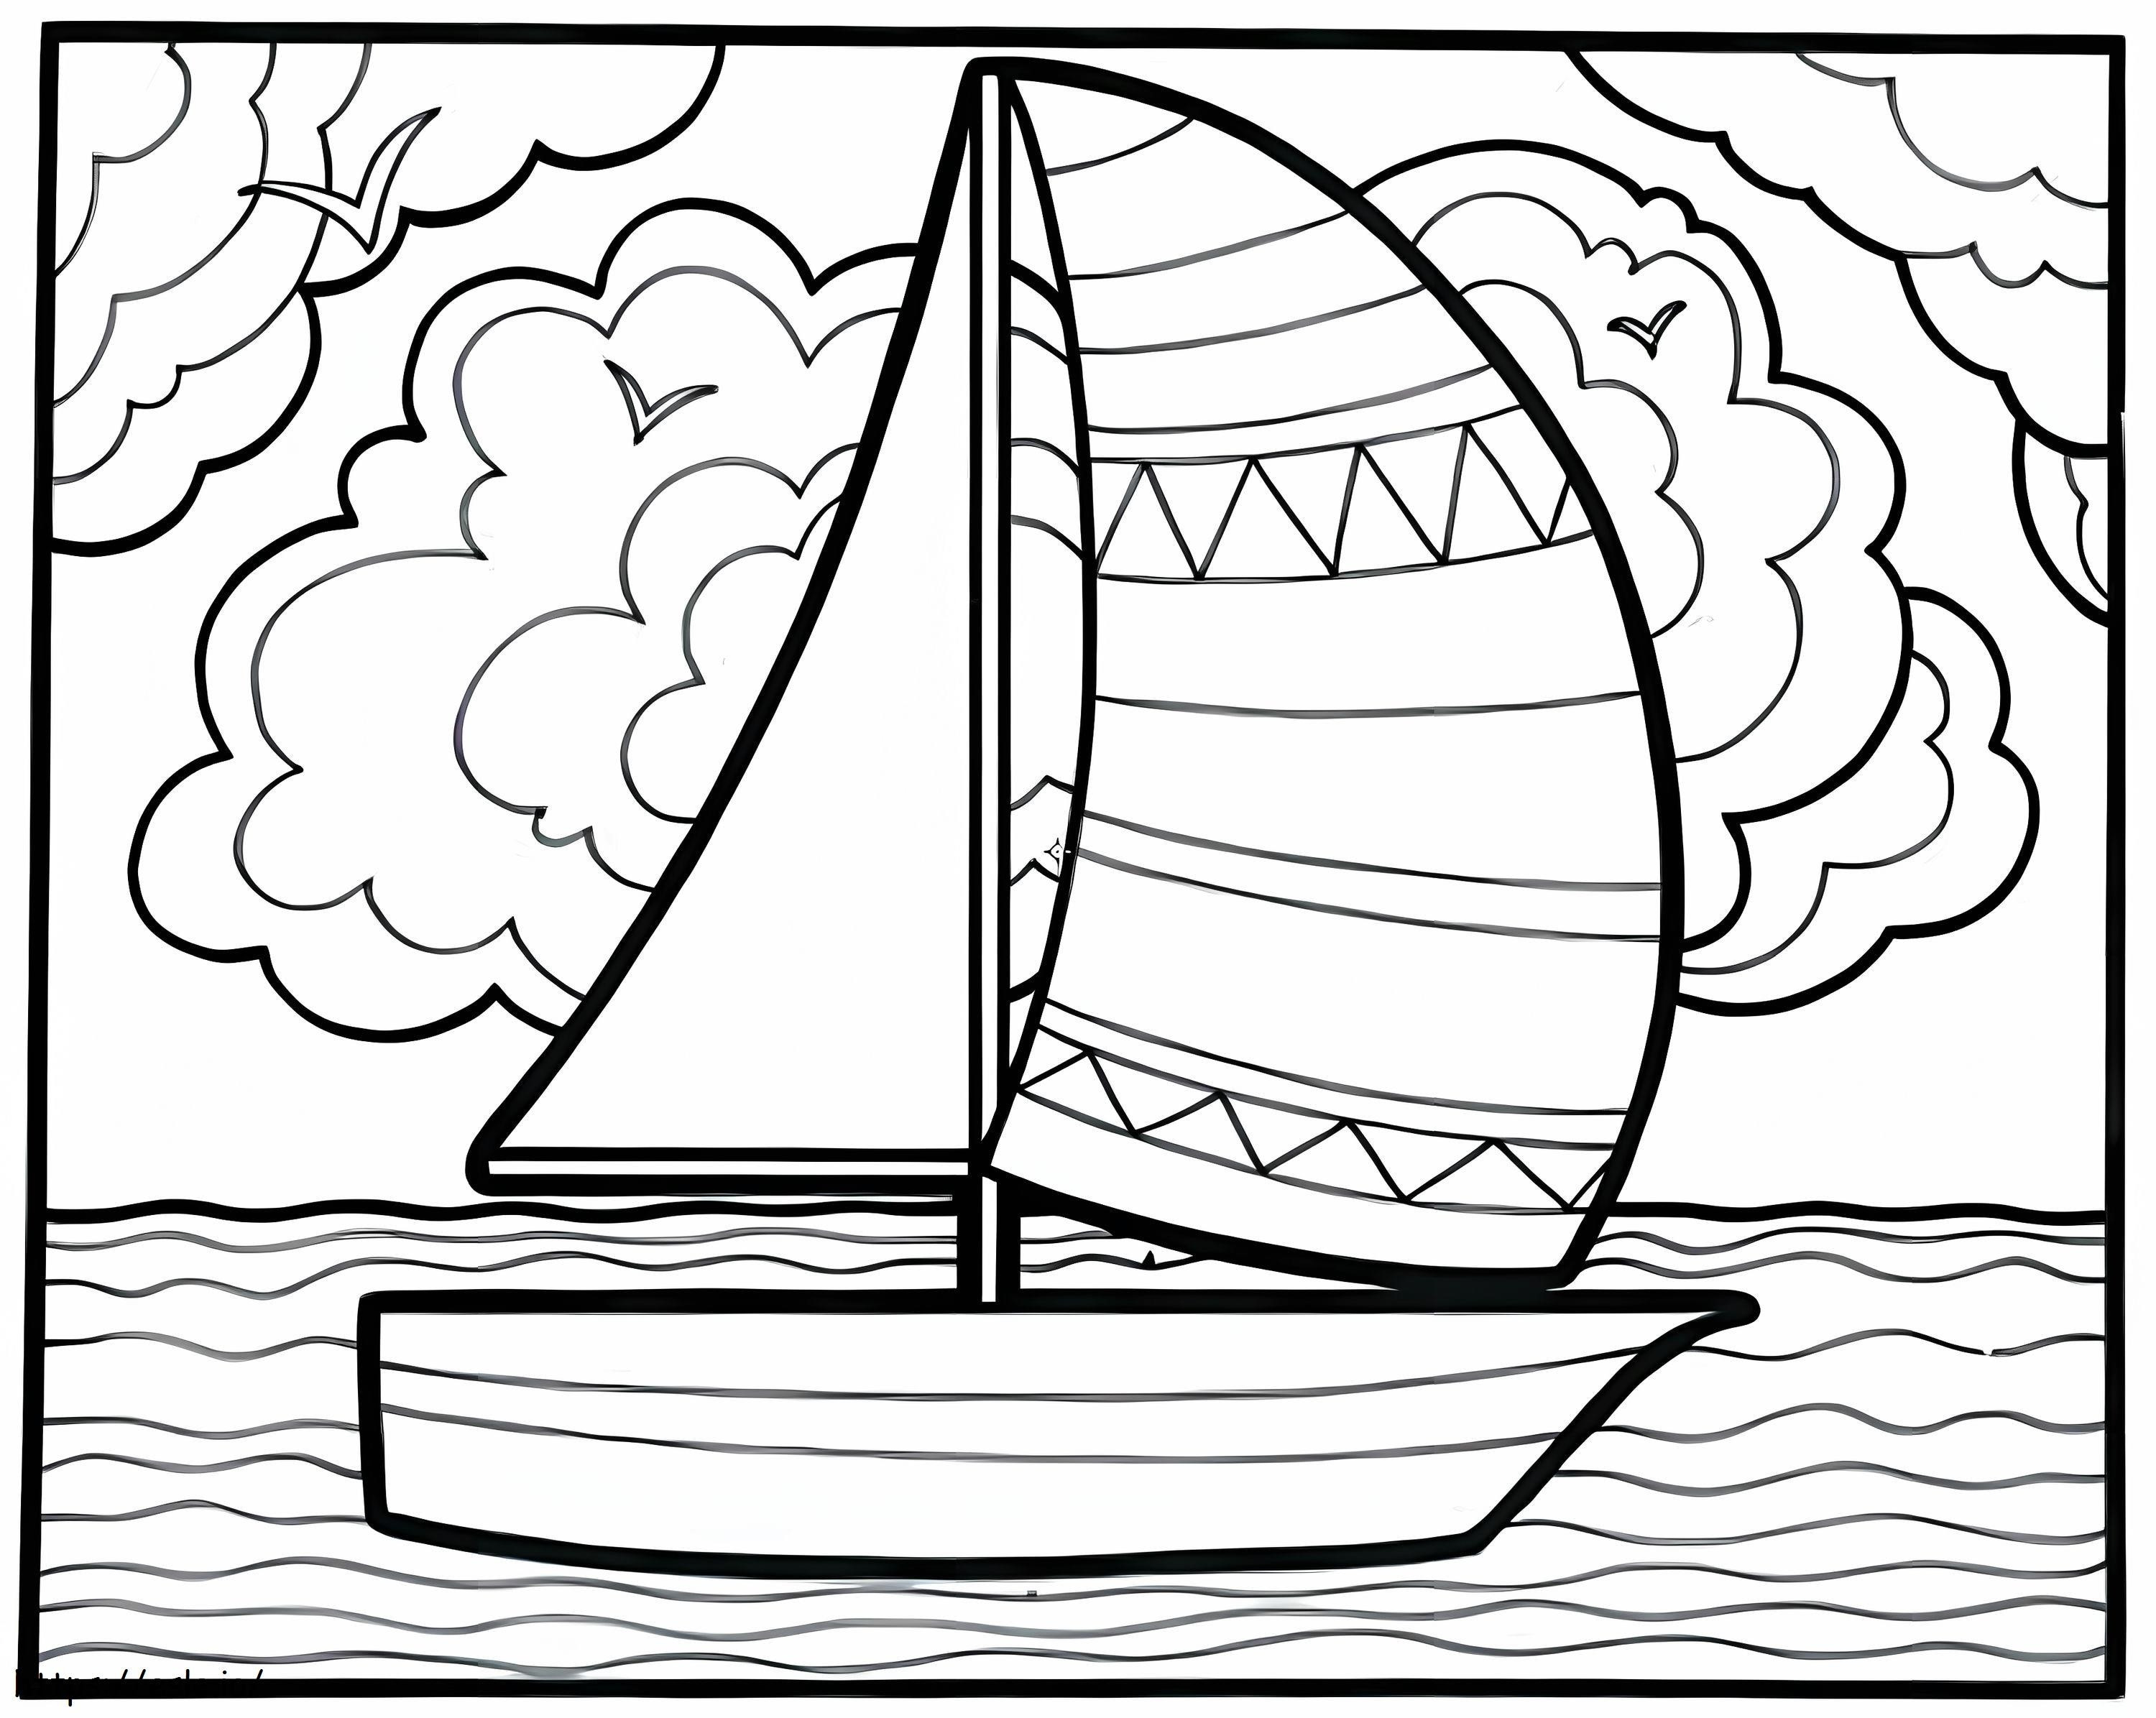 Sailboat For Adults coloring page